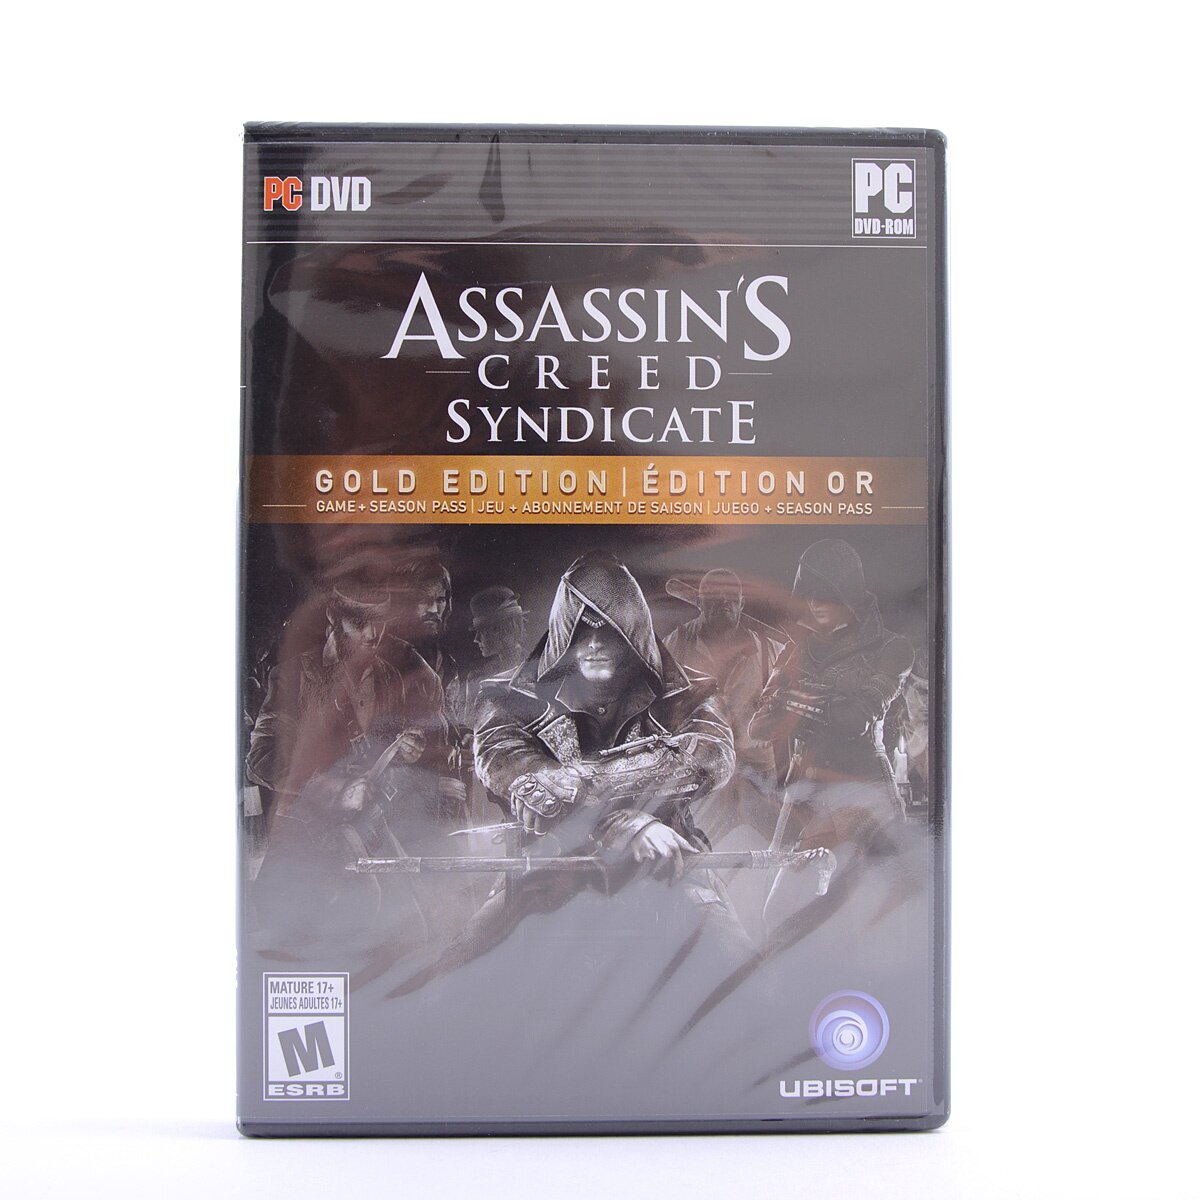 Assassin's Creed Syndicate Gold Edition (PS4) - Tokyo Otaku Mode (TOM)